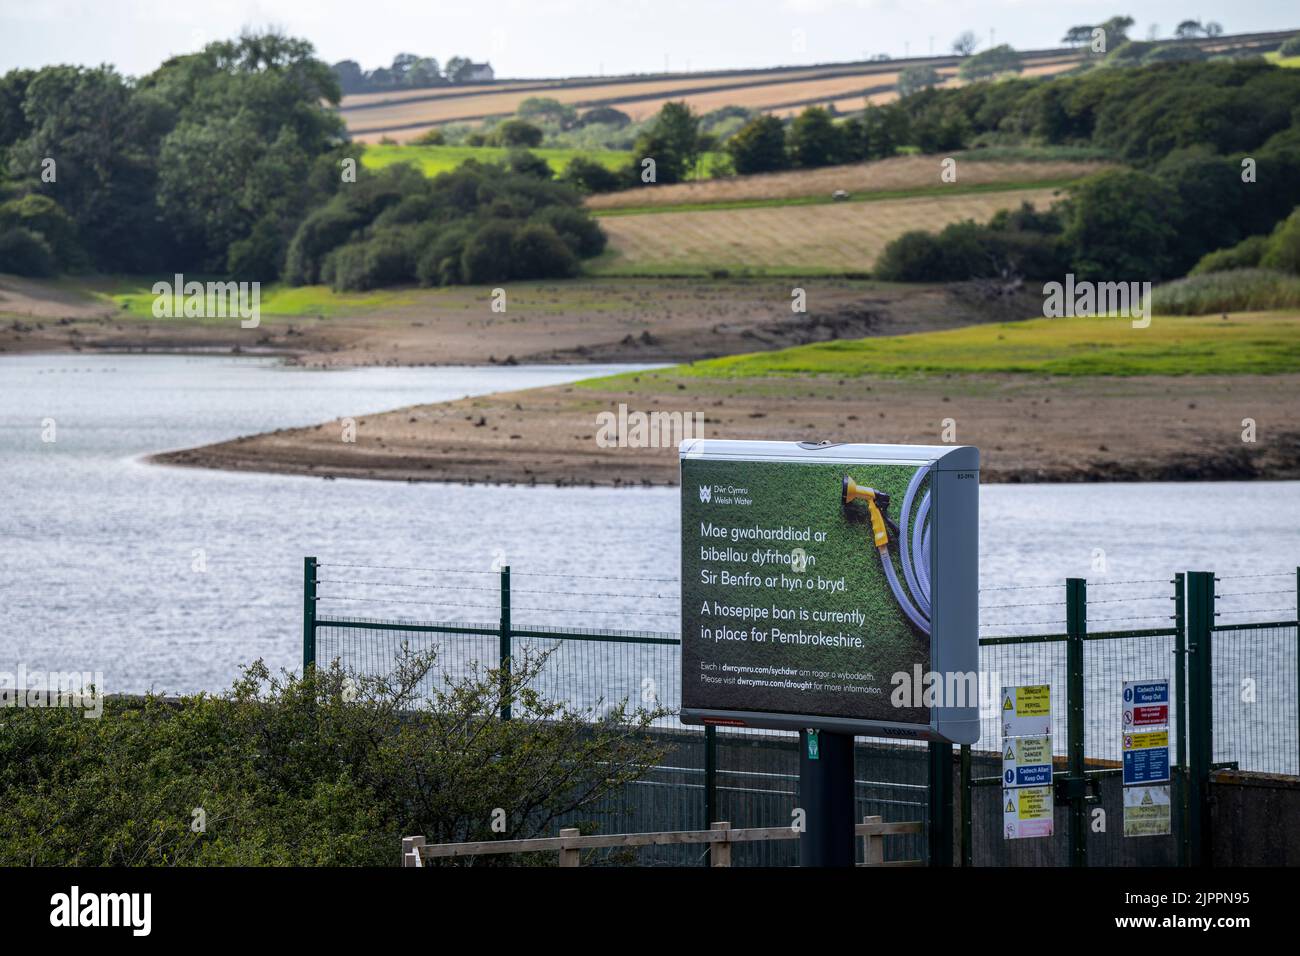 Drought declared across parts of mid and south Wales as Pembrokeshire hosepipe ban comes into force.Pictured is Llys y Fran reservoir. Stock Photo